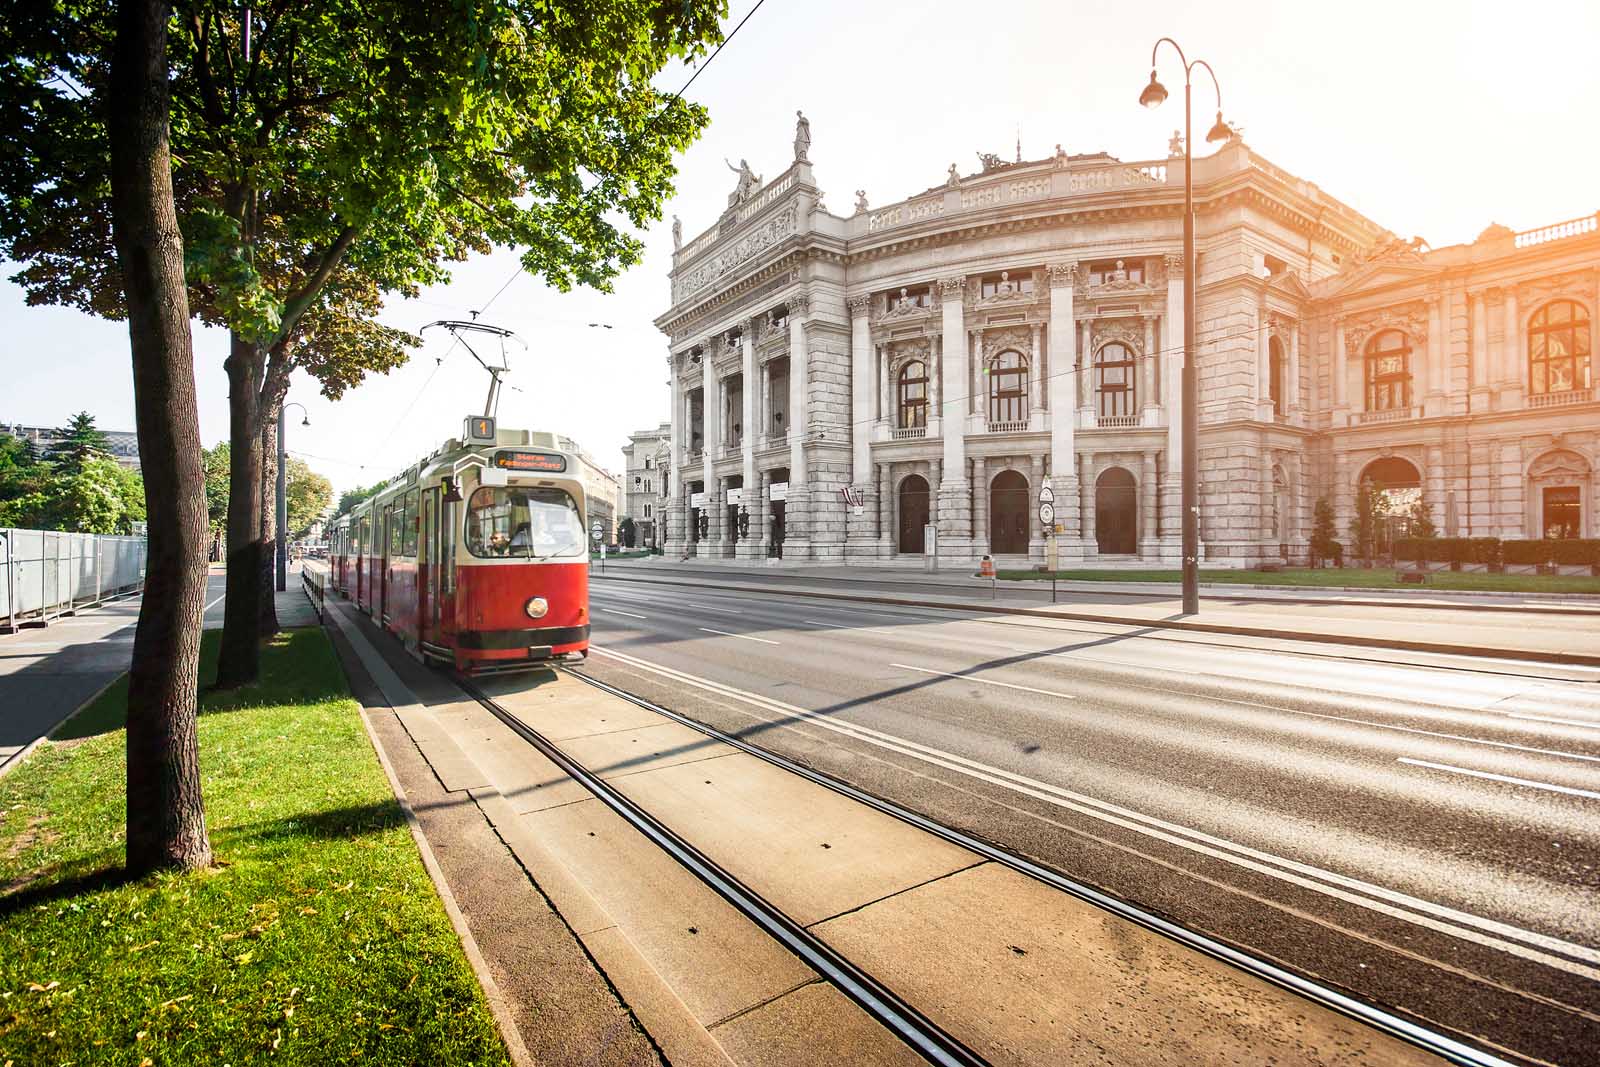 Things to do on the Ringstrasse in Vienna